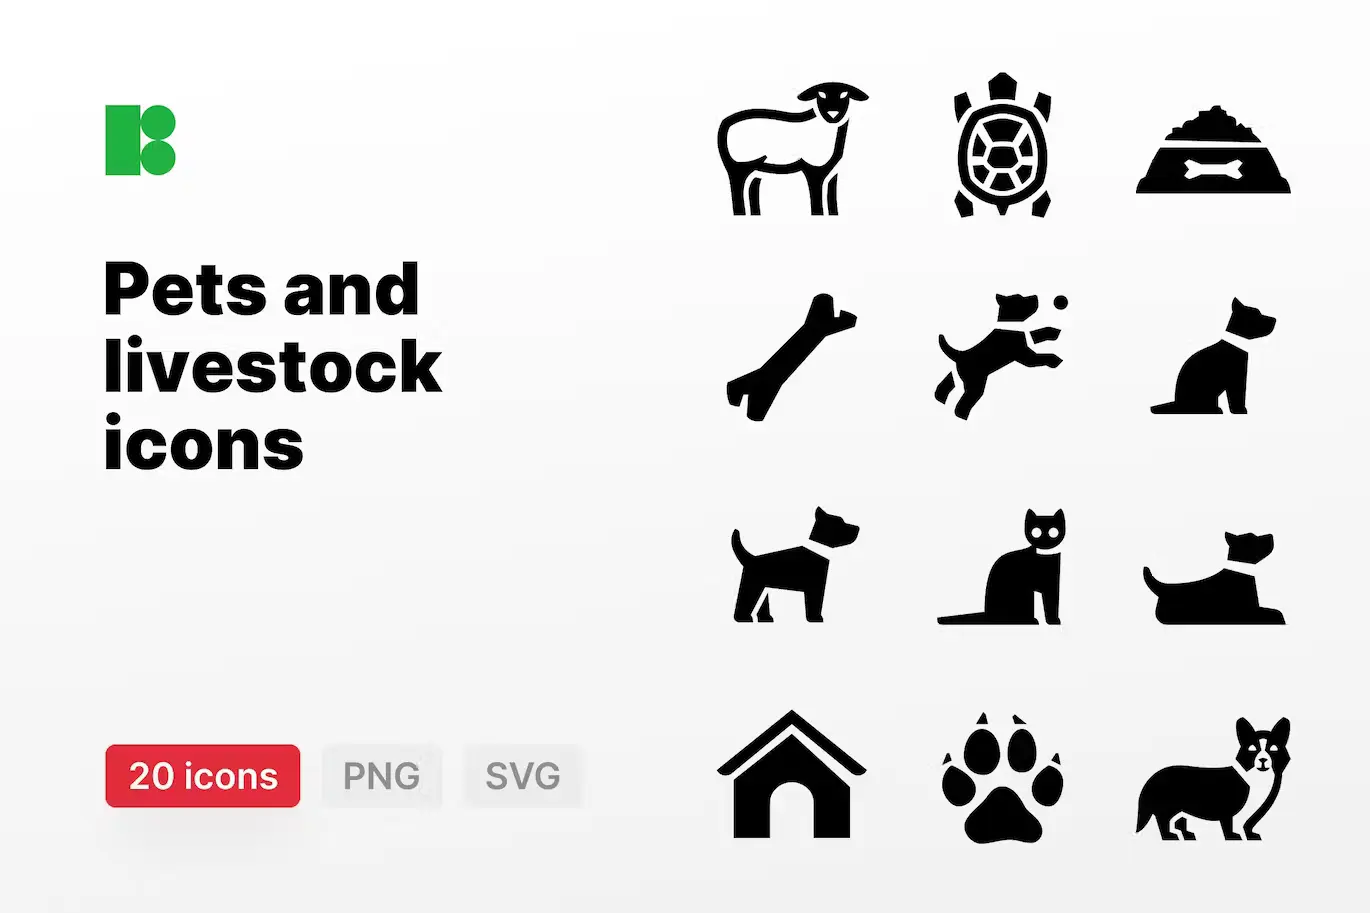 20 Pets and livestock Icons - PNG and SVG